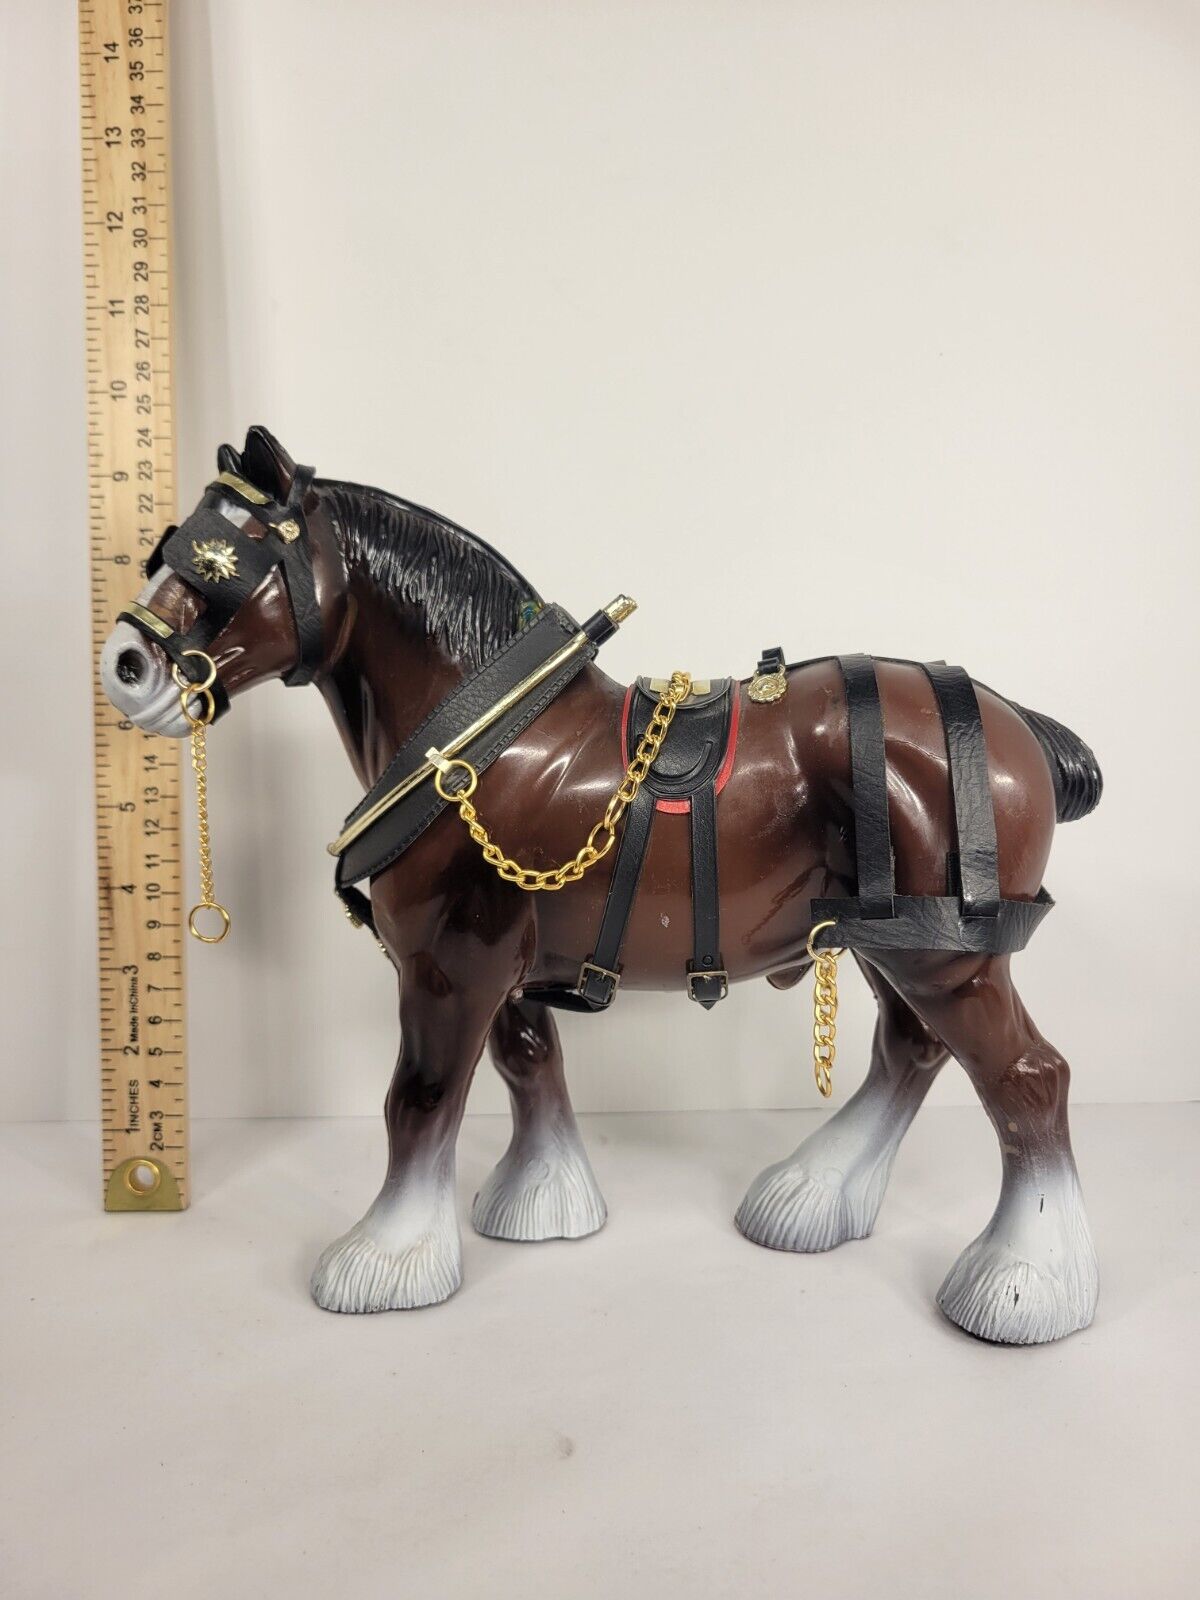 Vintage Justen Blue Ribbon Clydesdale 3168 Horse Toy Hard Plastic Budweiser